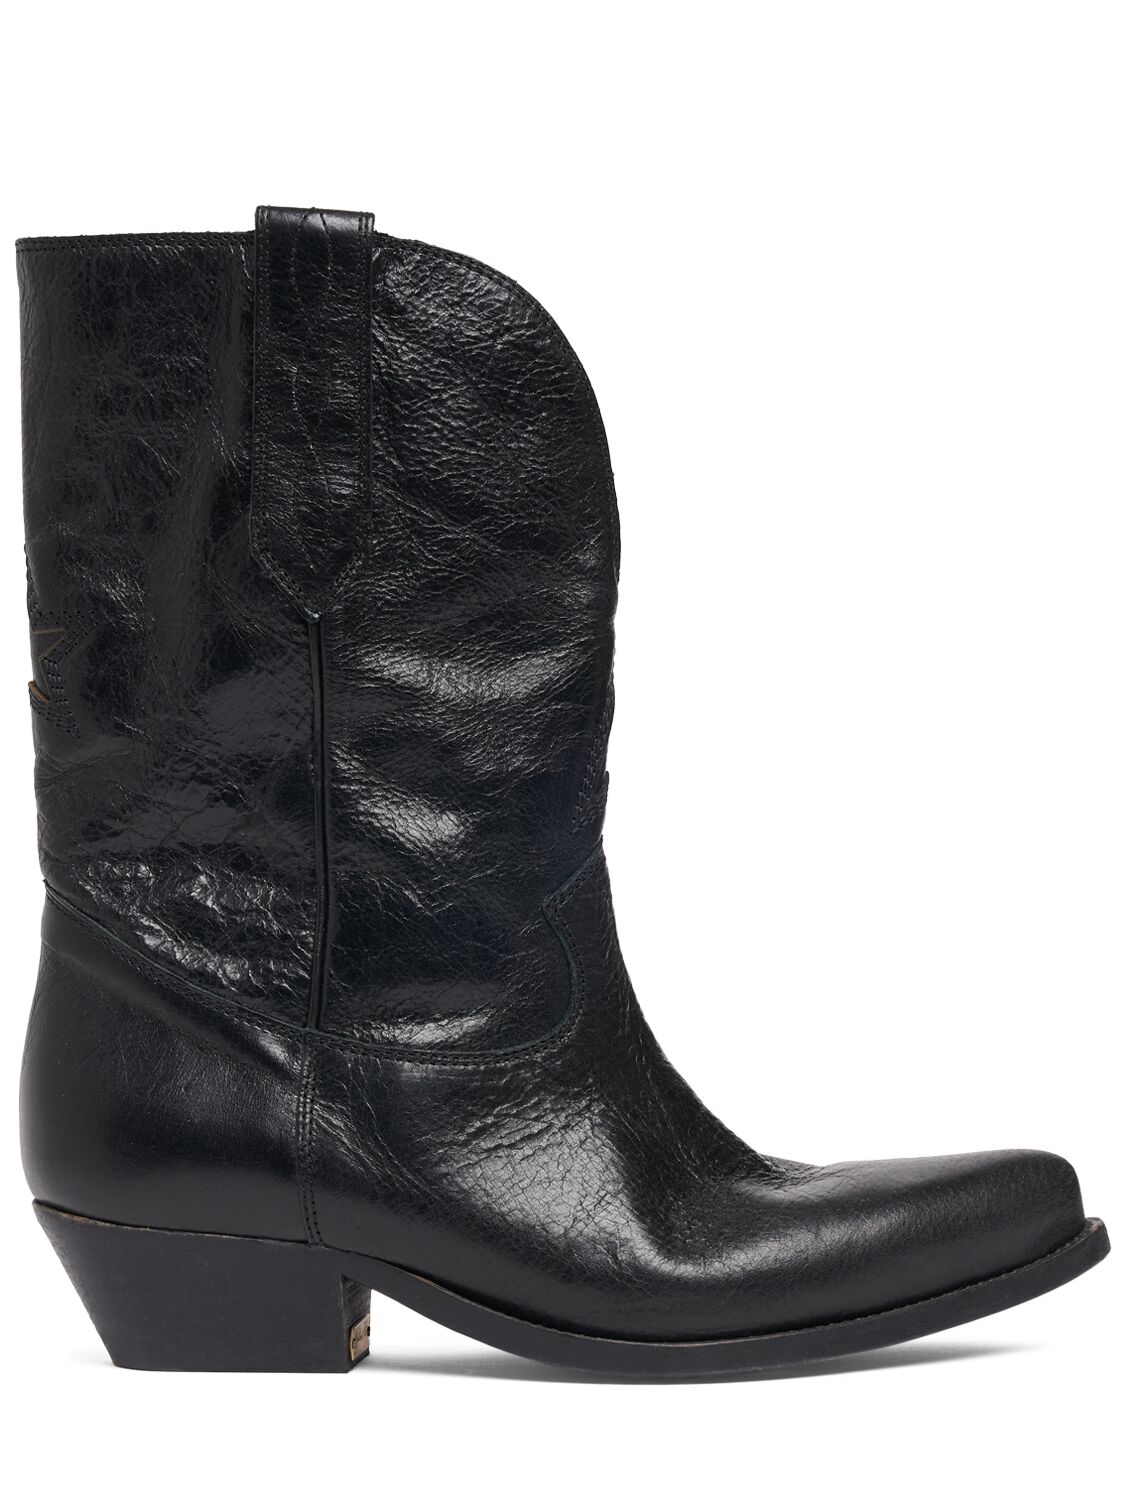 Mm Wish Star Shiny Leather Ankle Boots - GOLDEN GOOSE - Modalova